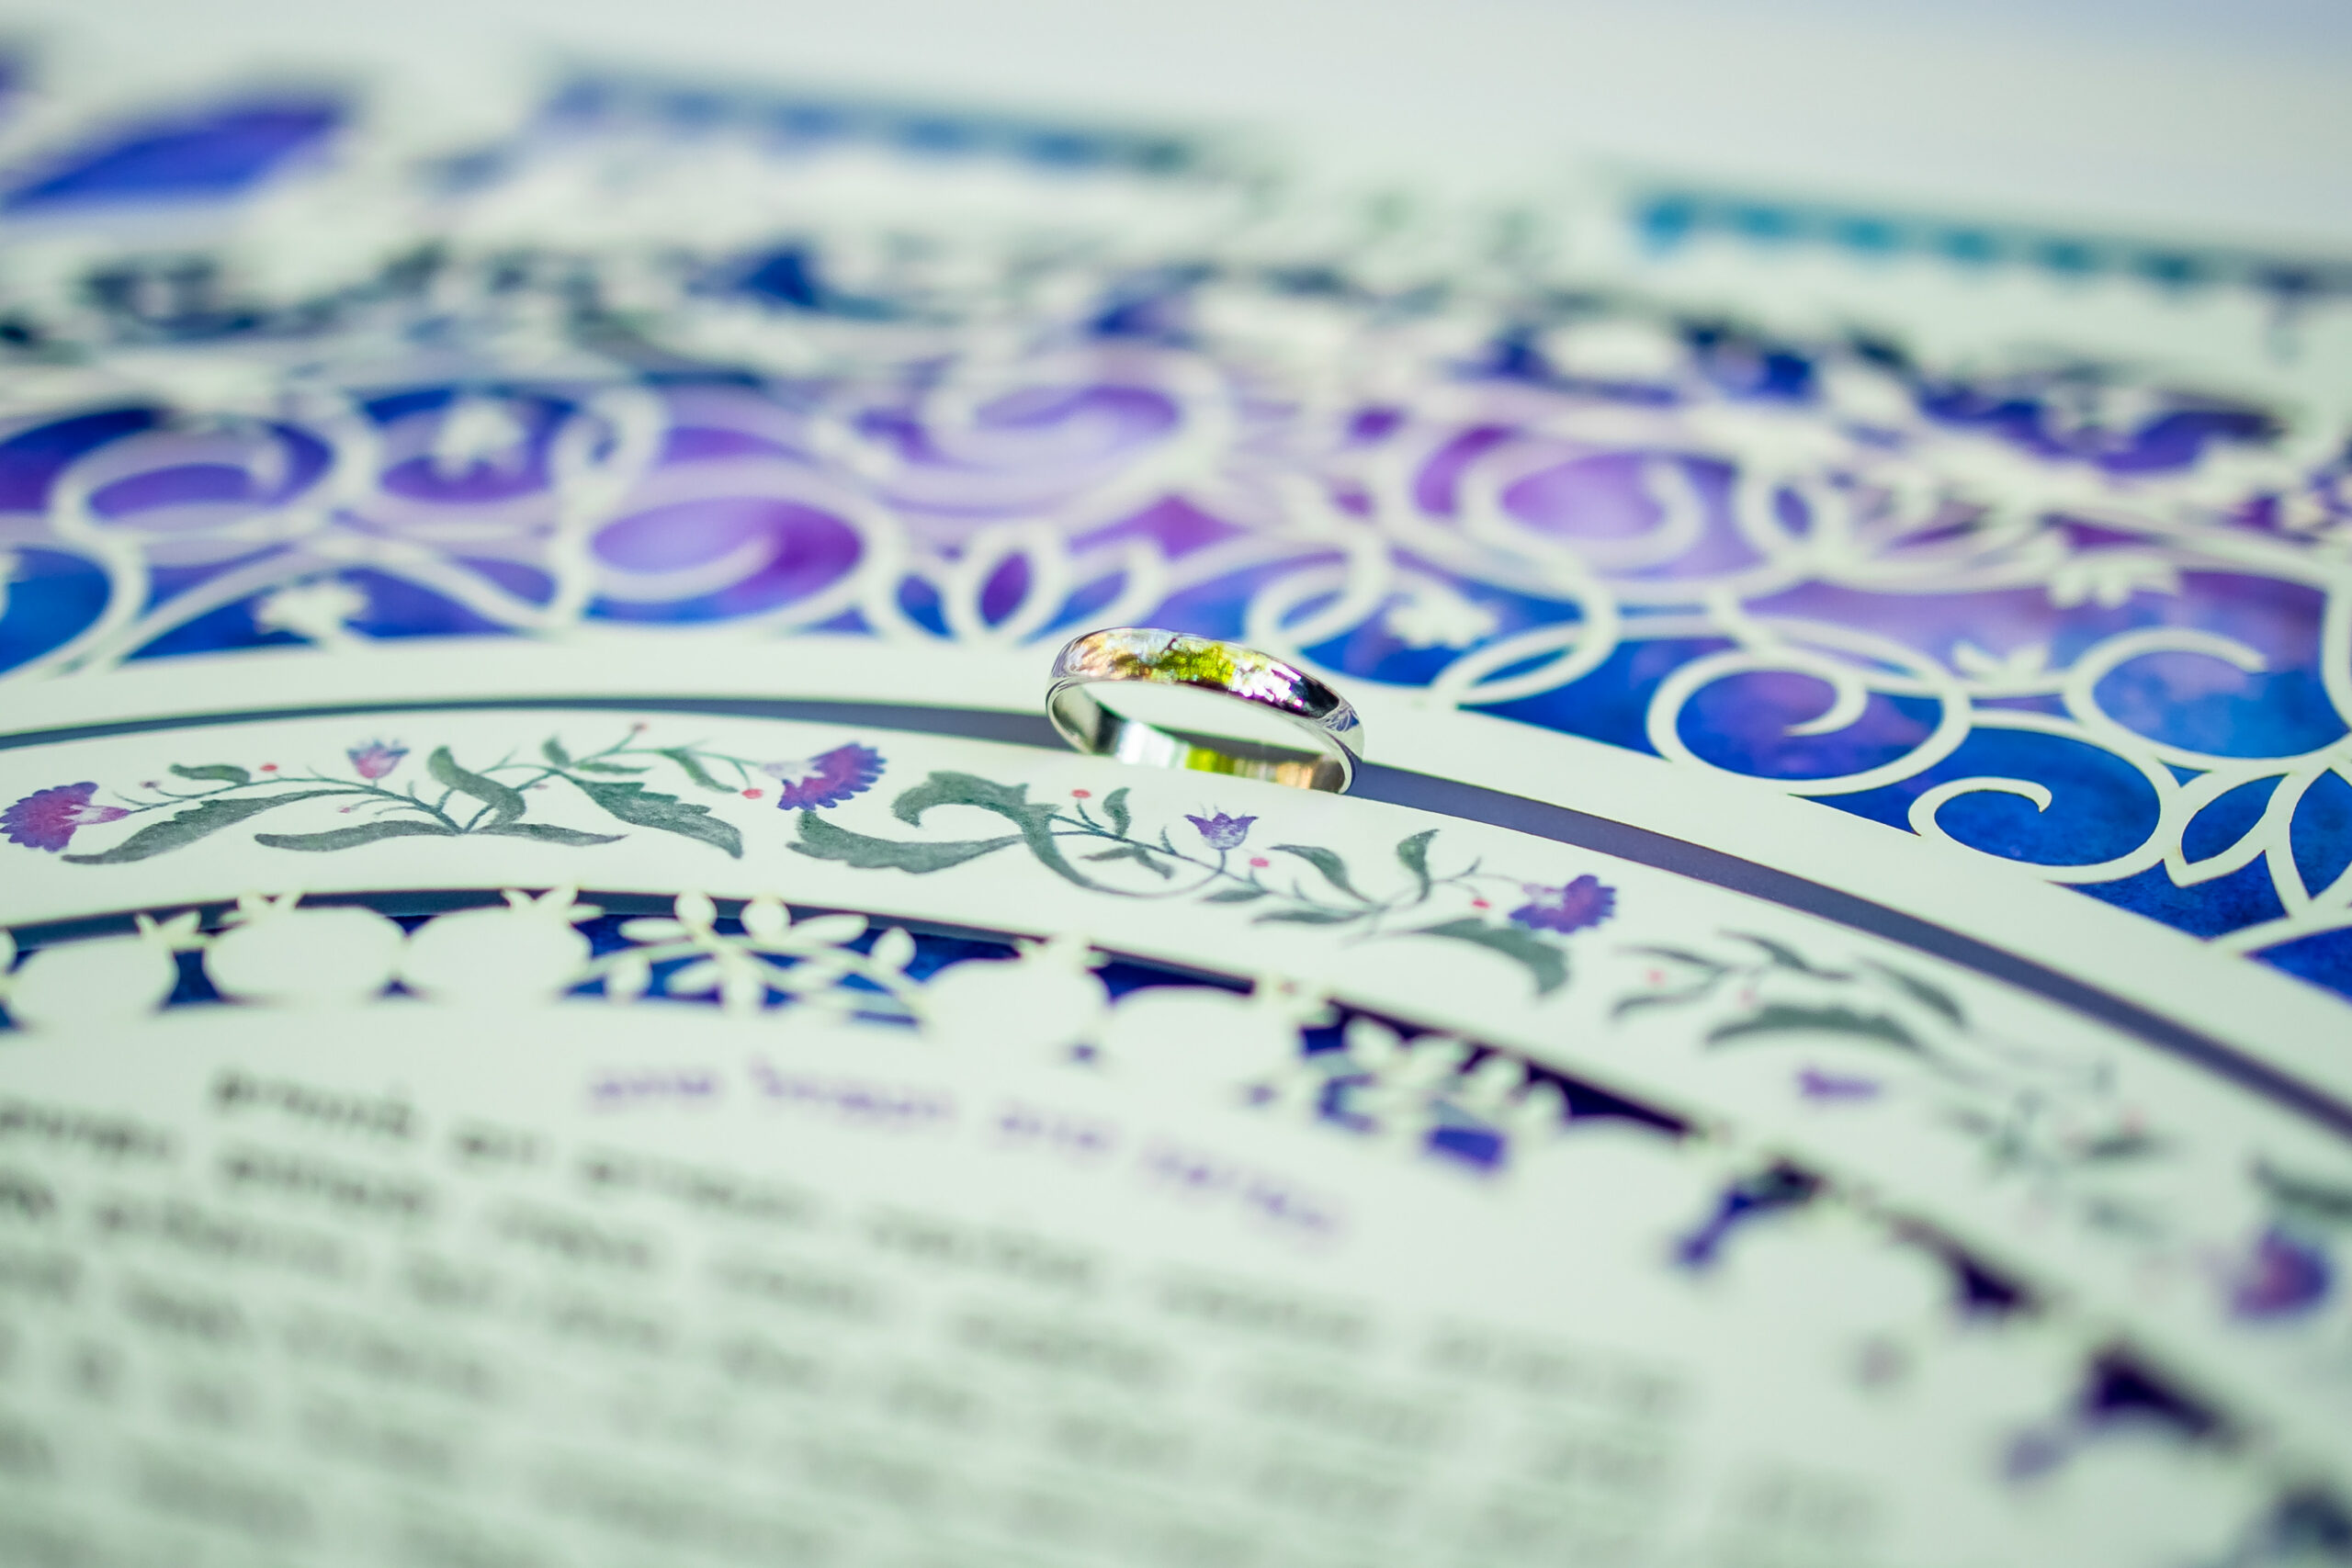 A futuristic concept art of a digitized Ketubah, hinting at the future of customized wedding gifts.